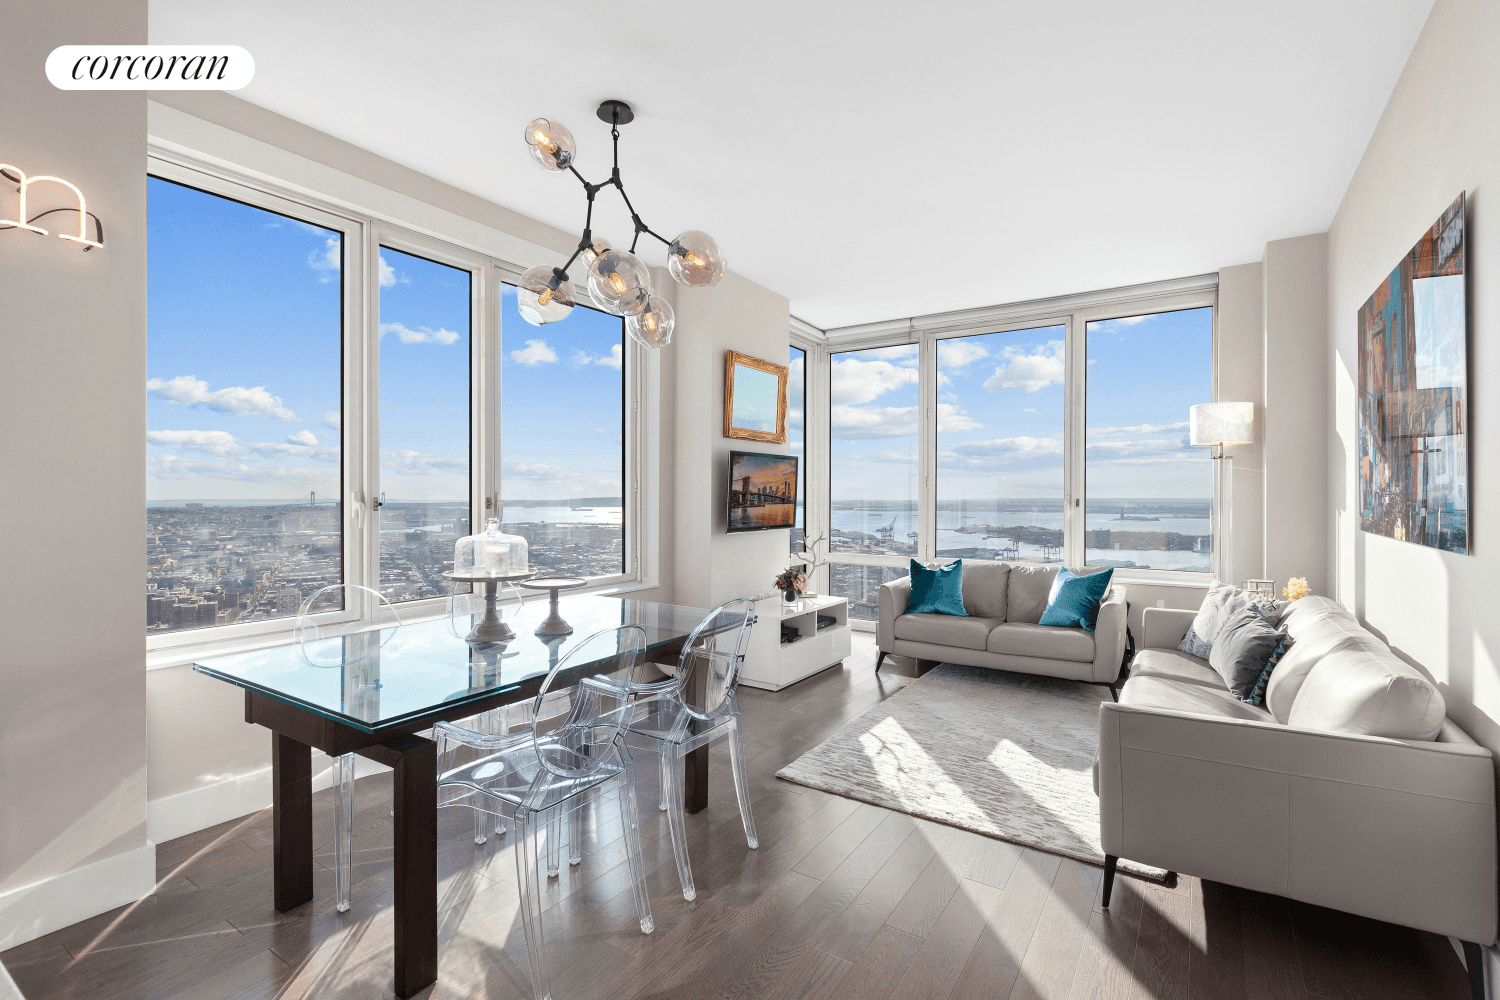 Welcome to apartment 44C at 388 Bridge Street an immaculate corner split two bed, two bath condo in the sky with breathtaking views over lower Manhattan, the New York Harbor, ...